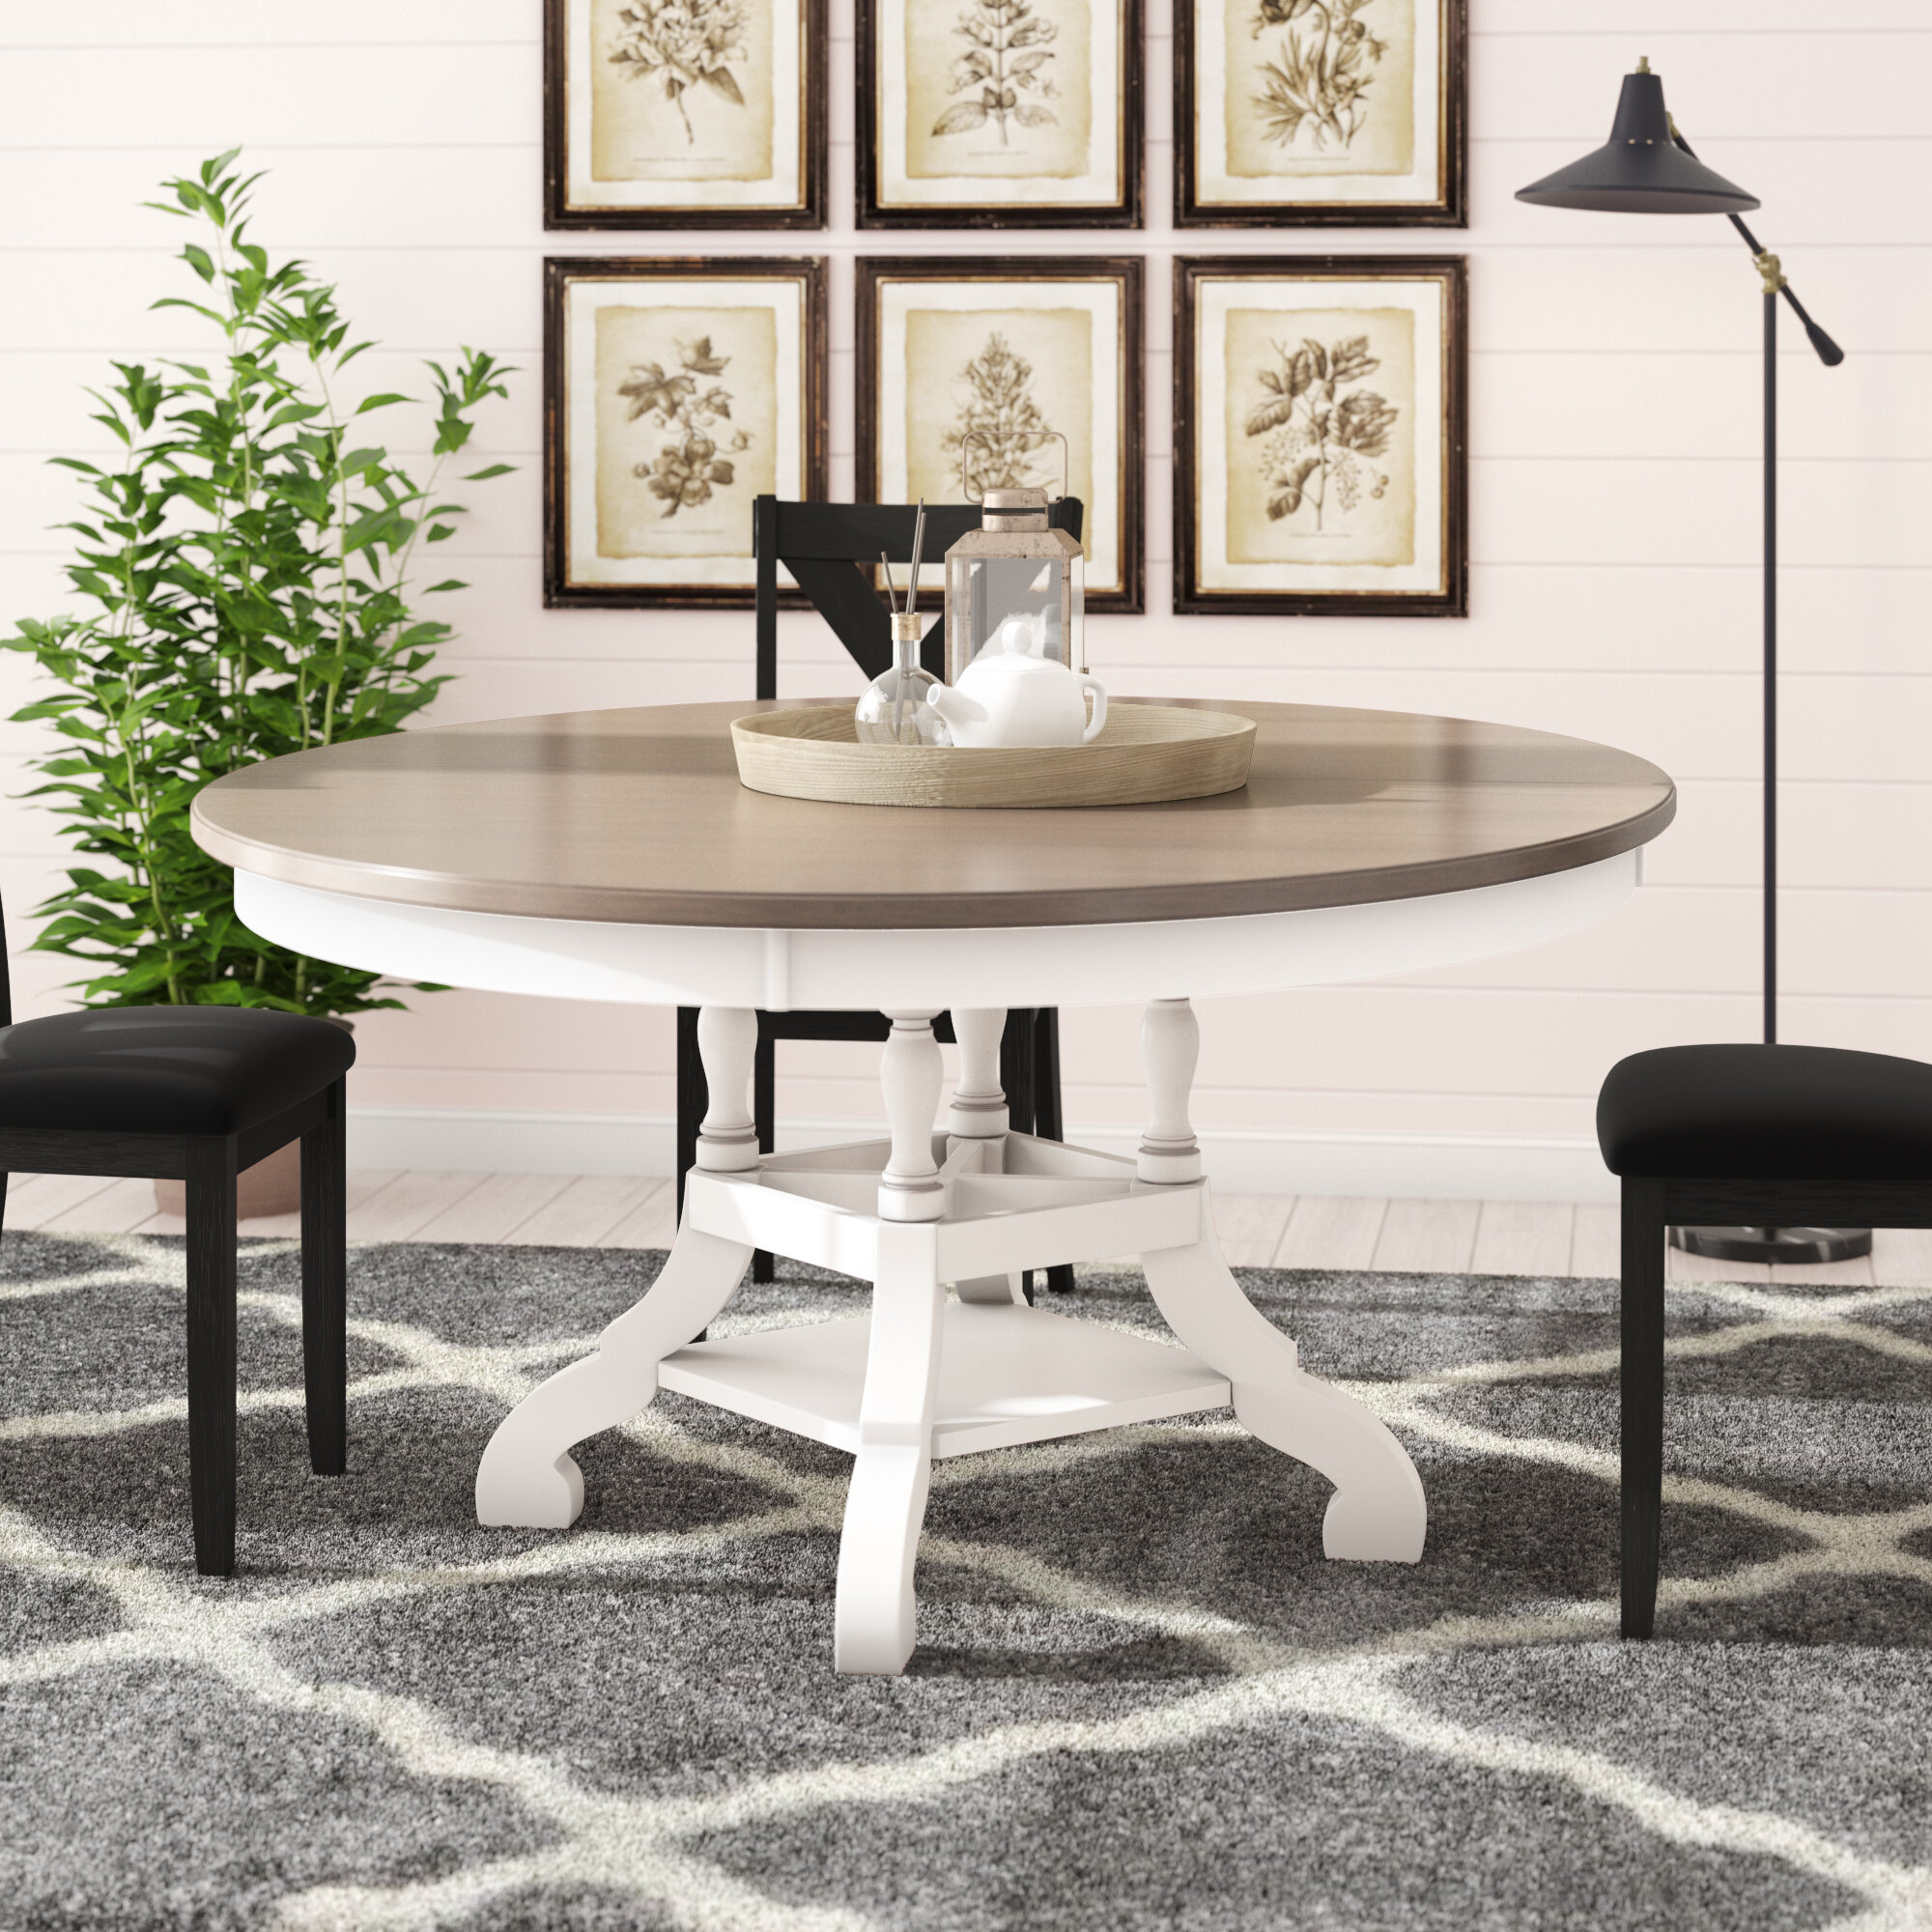 Expandable Round Dining Table For 12 | Decoration Items Image